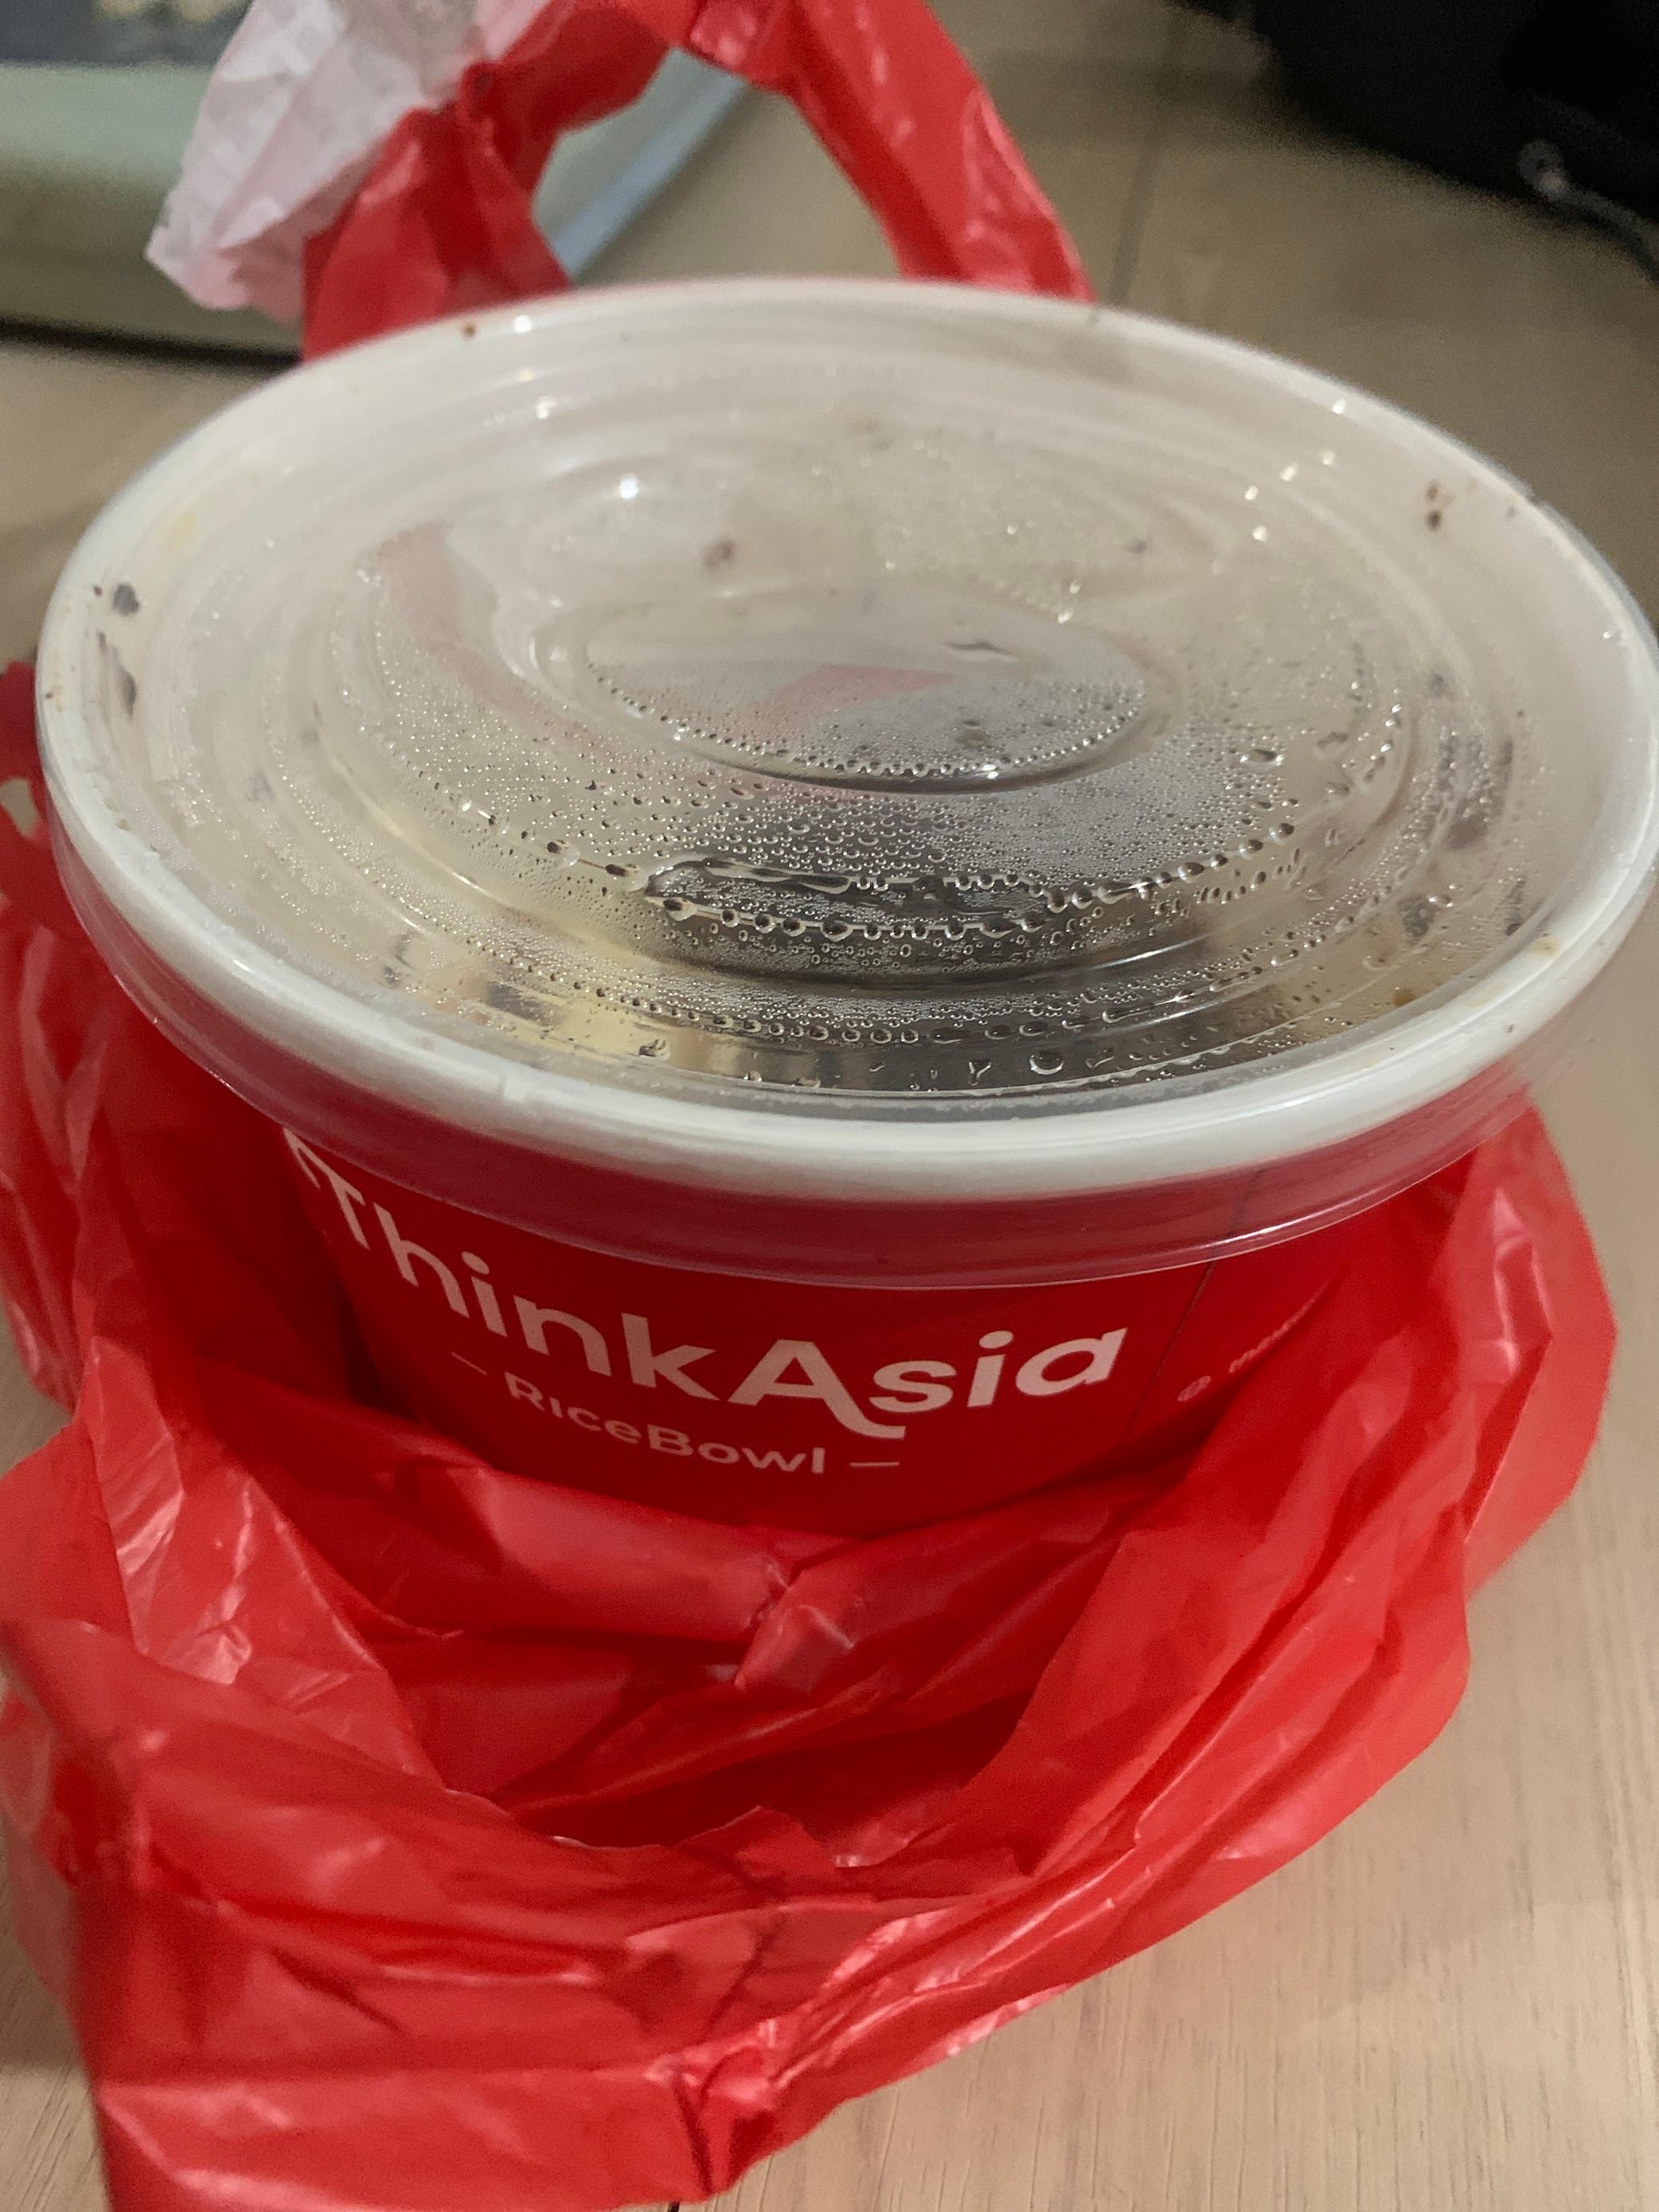 Think Asia Restaurant & Catering review